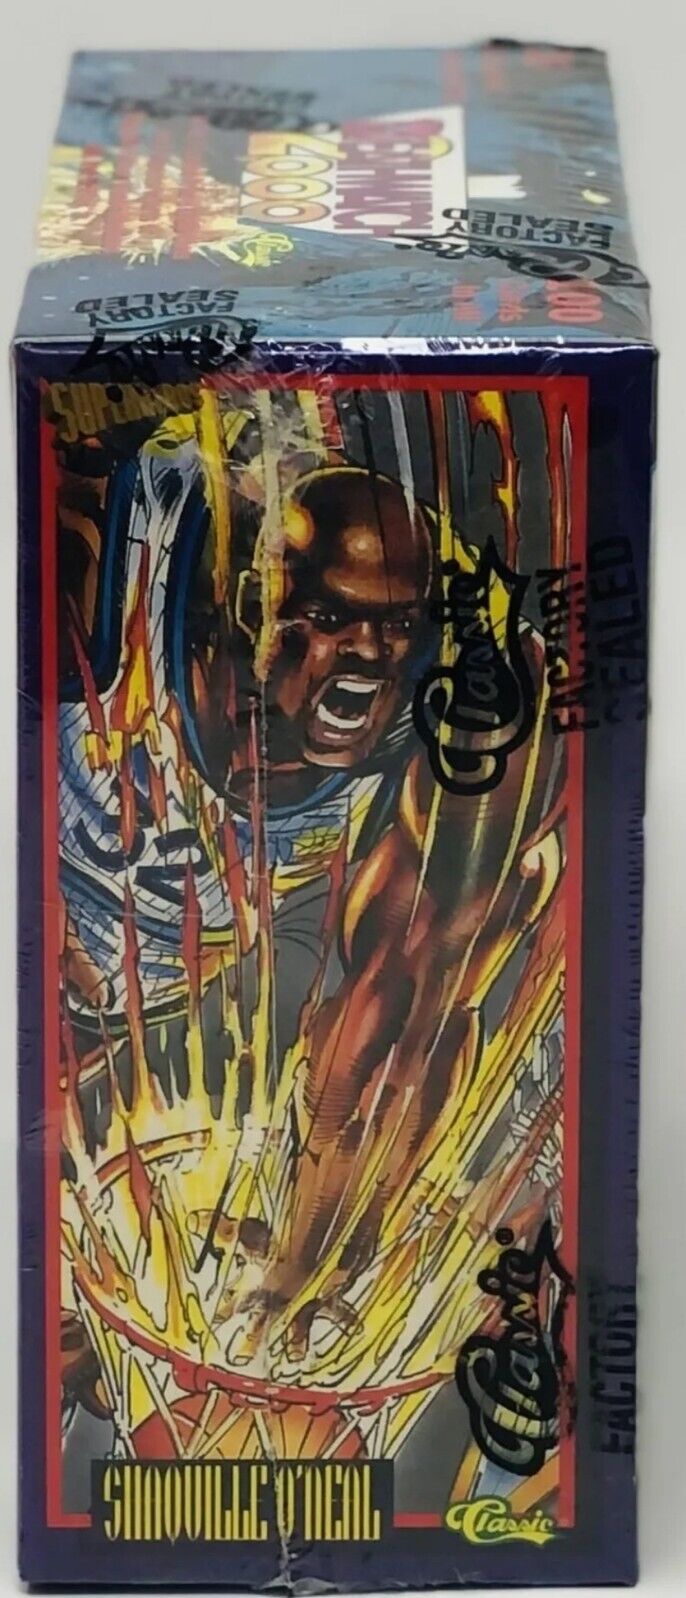 1993 Classic Deathwatch 2000 Factory Sealed 20 Pack Jumbo Box SHAQUILLE O’NEAL